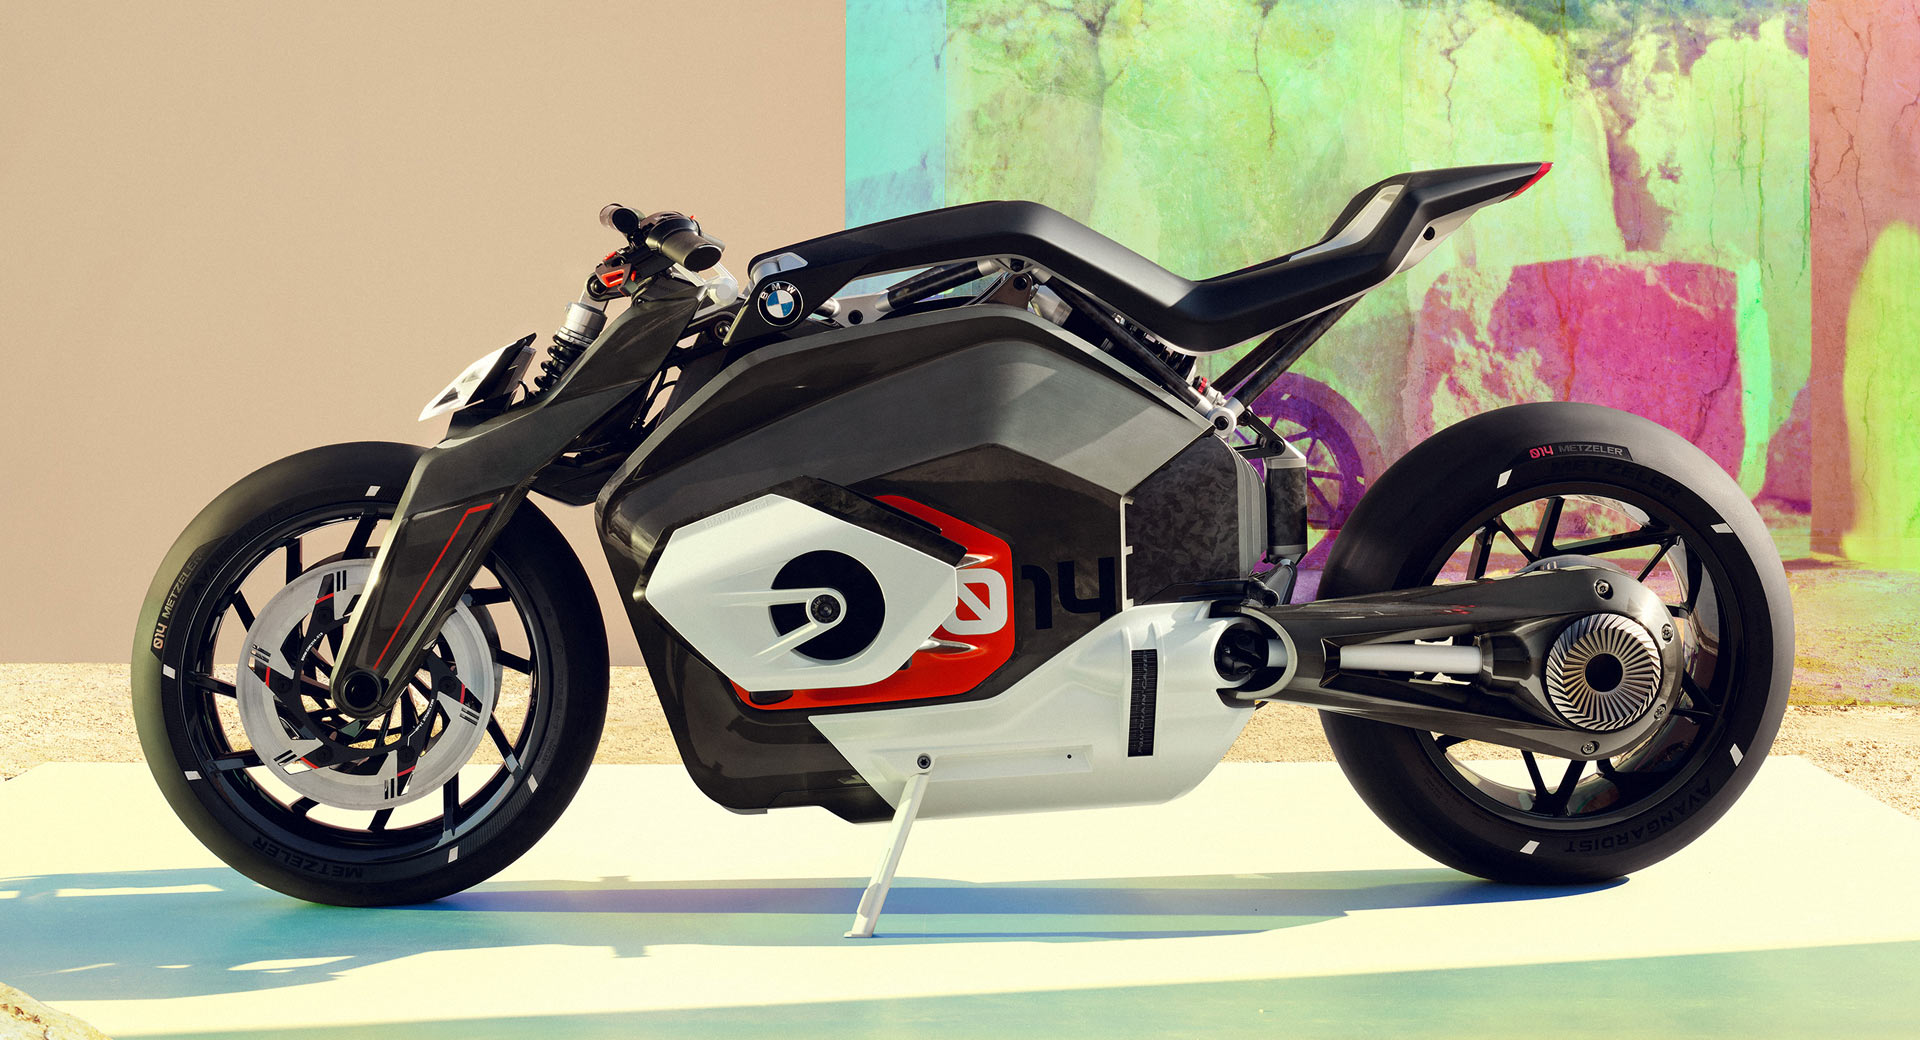 BMW's Vision DC Roadster Is A Futuristic Electric Motorcycle | Carscoops